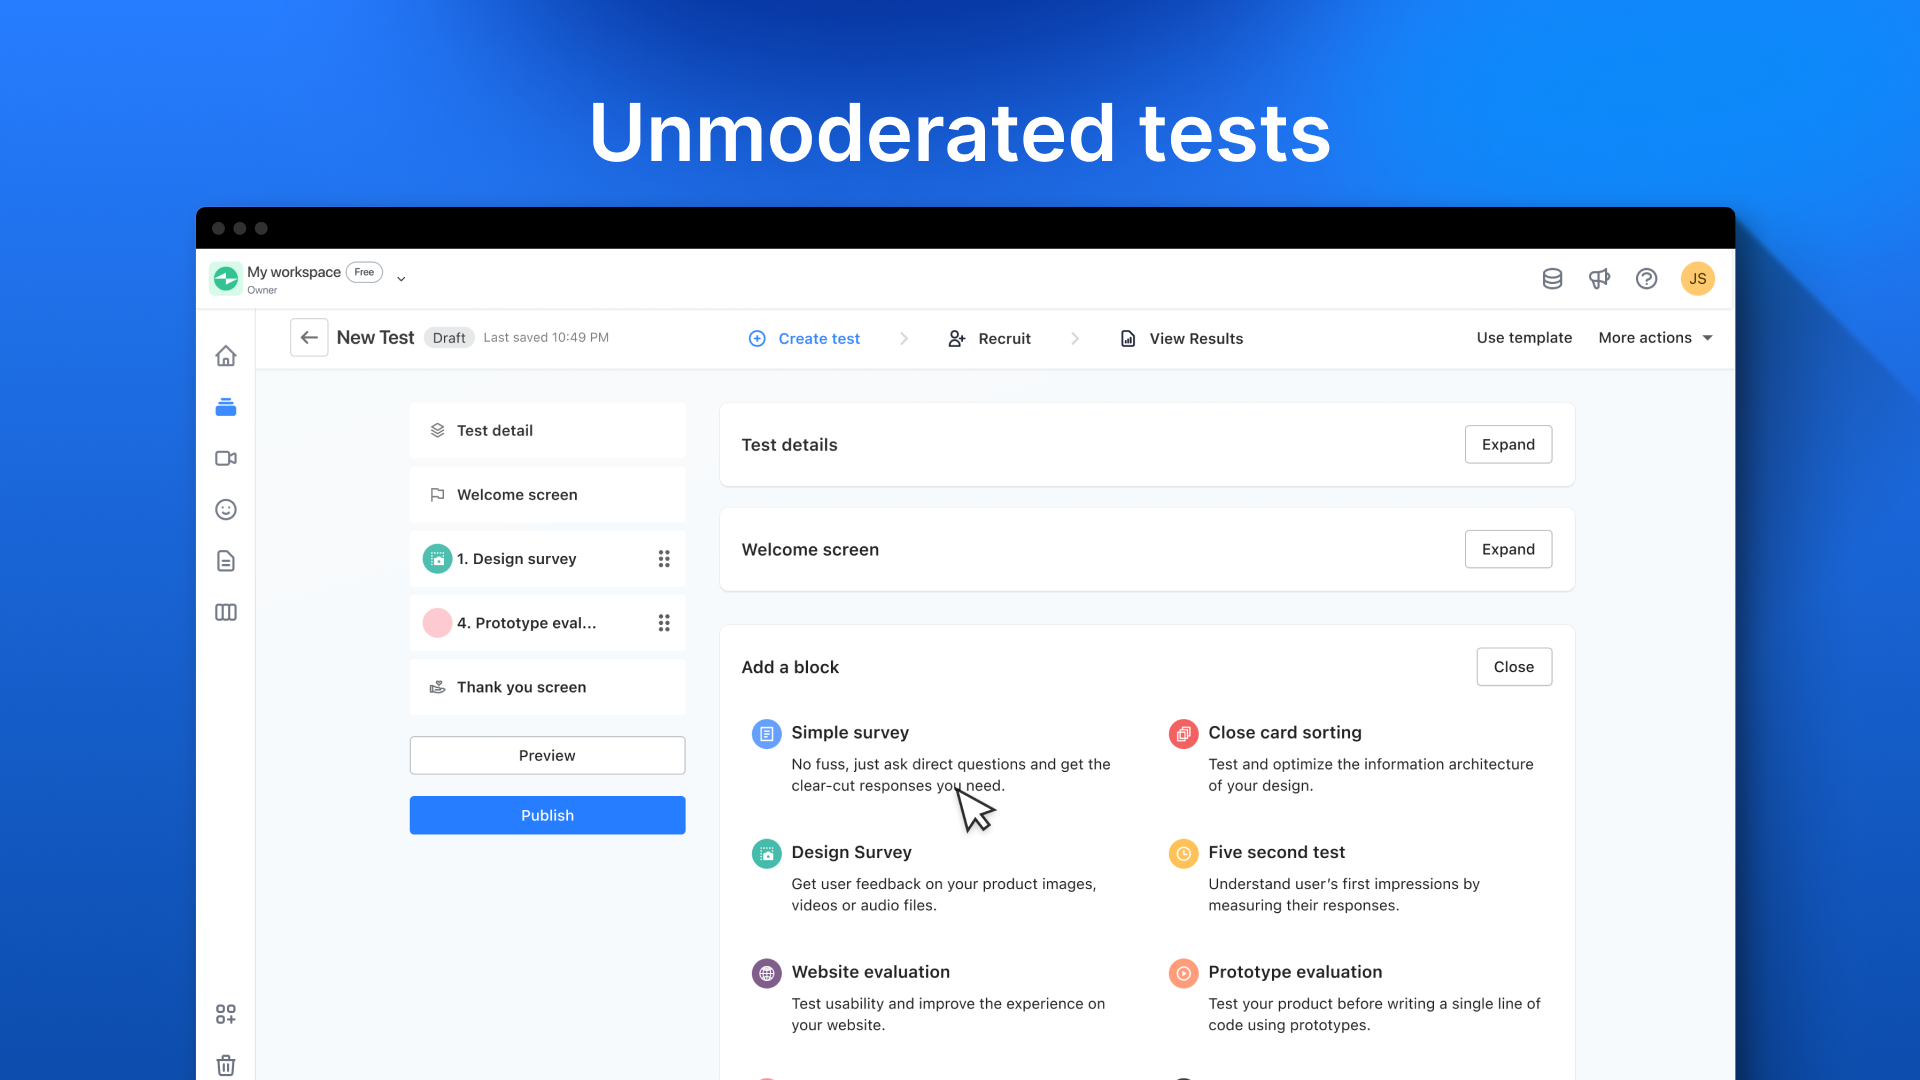 Unmoderated tests